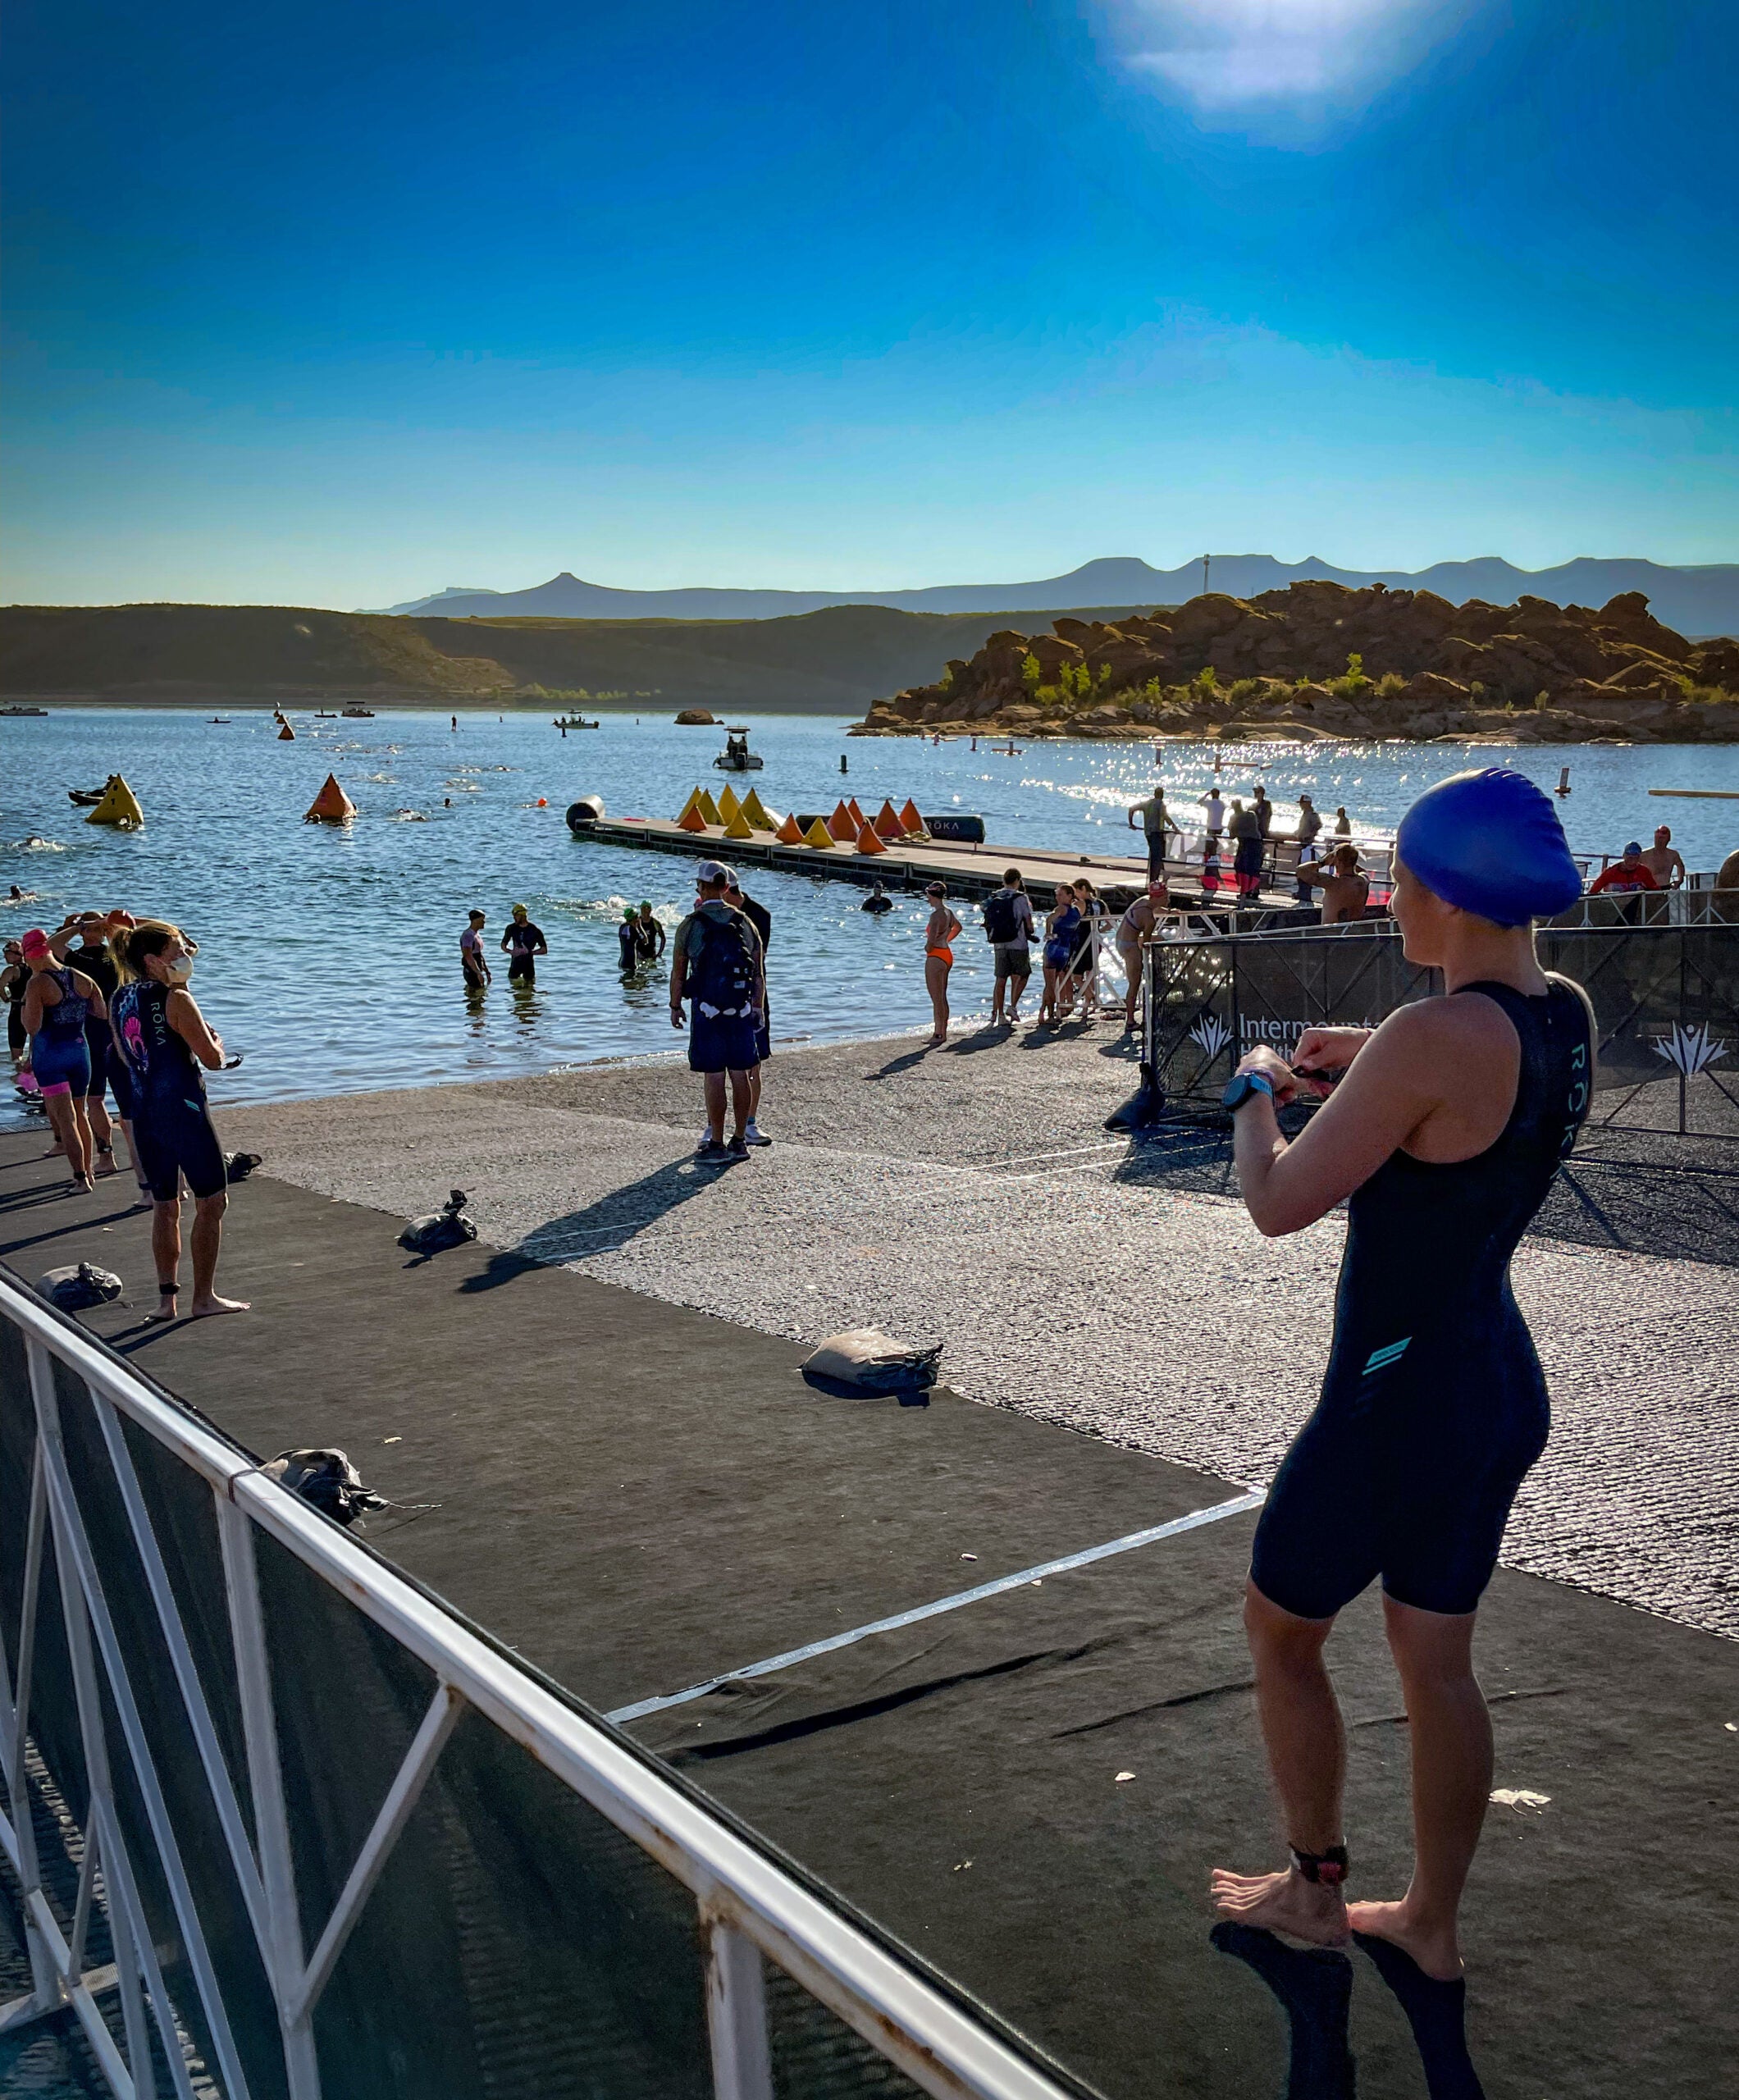 The Sand Hollow Triathlon, one of the best sprint and Olympic distance triathlons in the United States